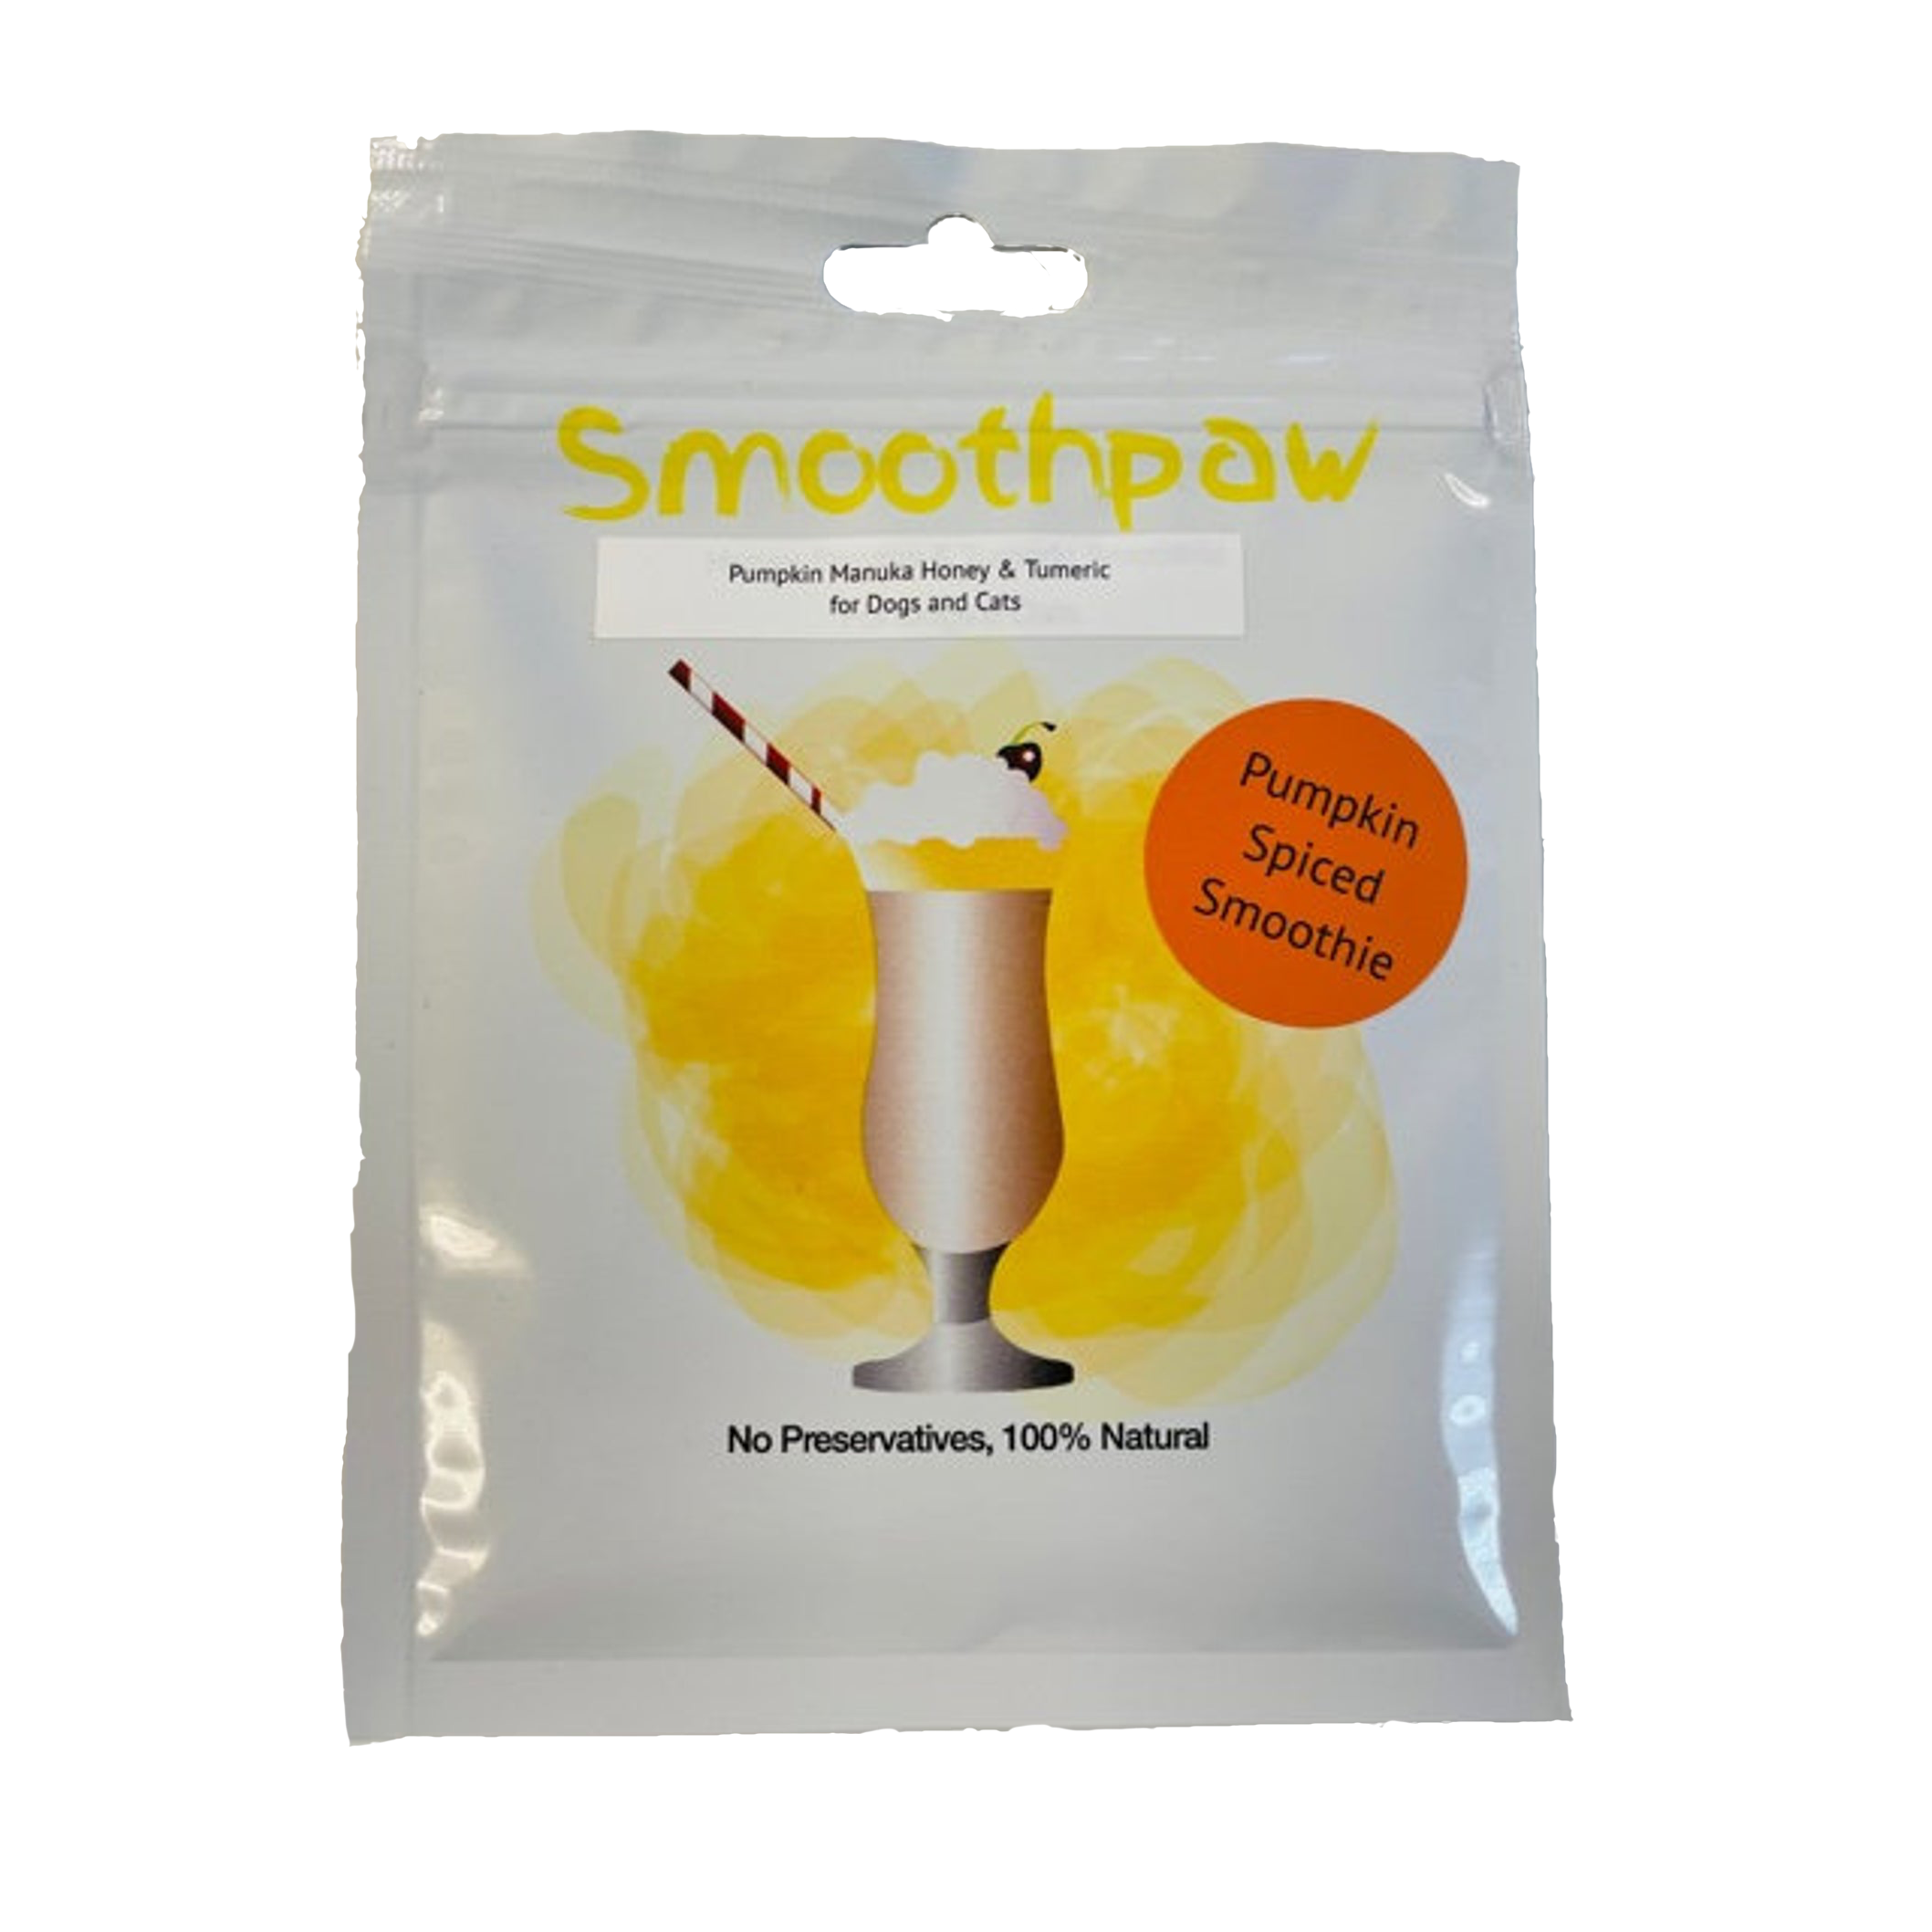 L'BARKERY - Smoothpaw Pumpkin Spiced Smoothie Drink